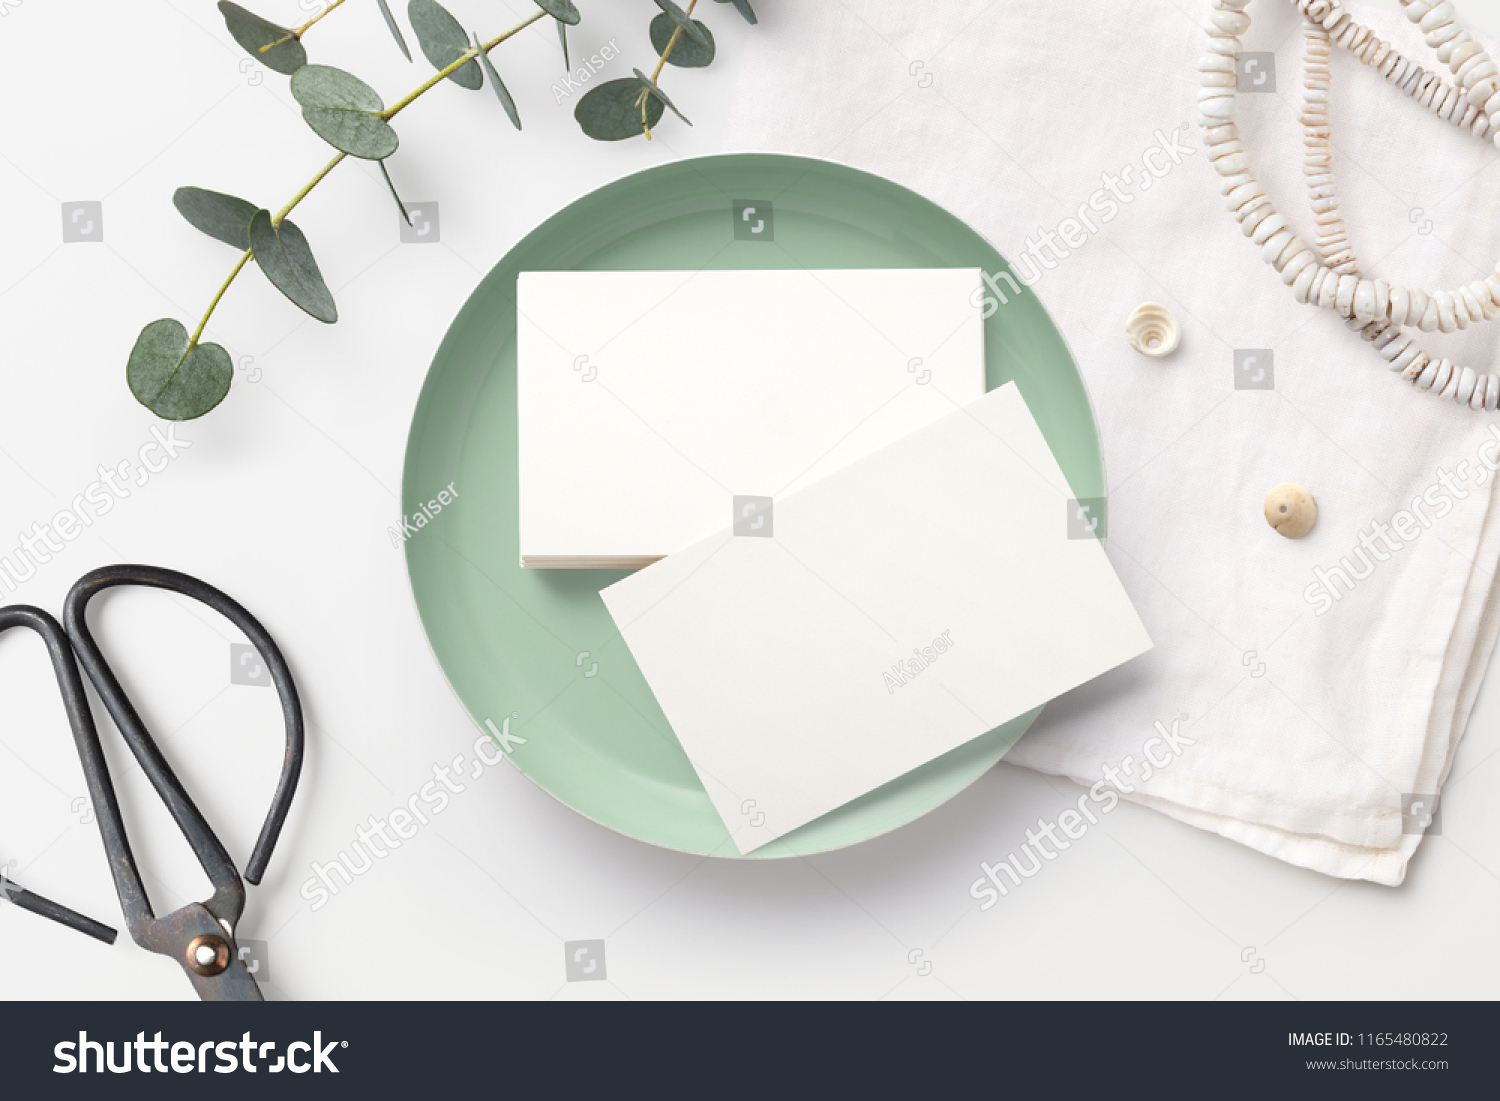 stack of blank business cards on a white feminine styled desk with mint bowl, decorative scissors, linen napkin and eucalyptus twigs. minimalist mock up, flat lay / top view #1165480822